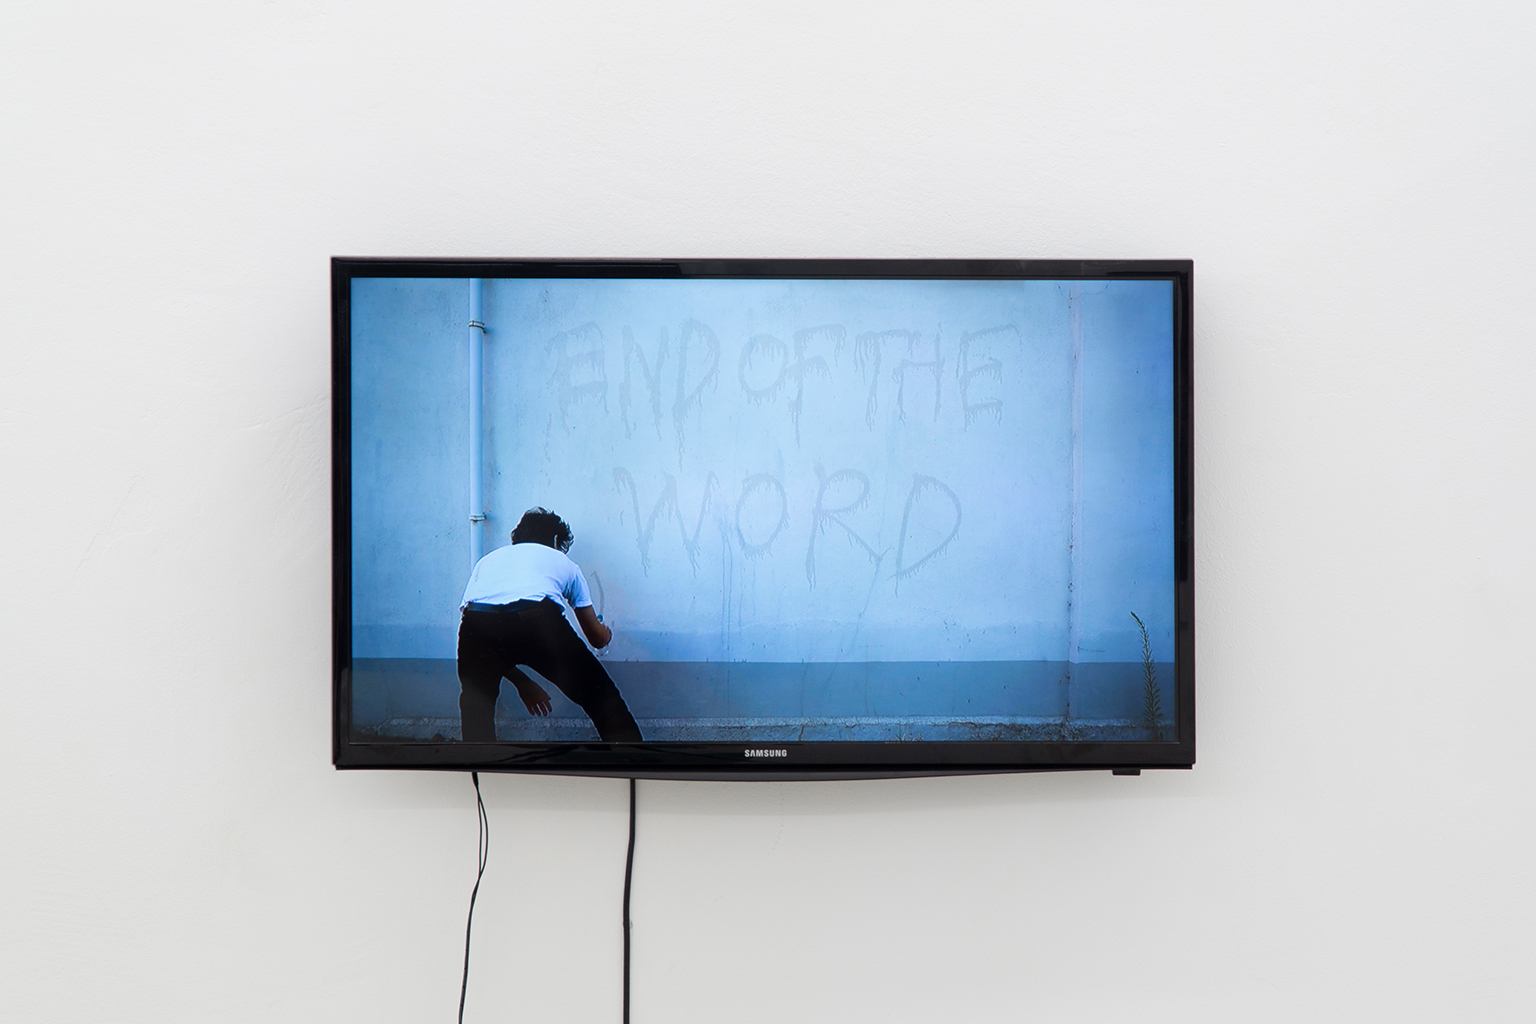 Flaviu Cacoveanu, "End of the word", video loop, 2018